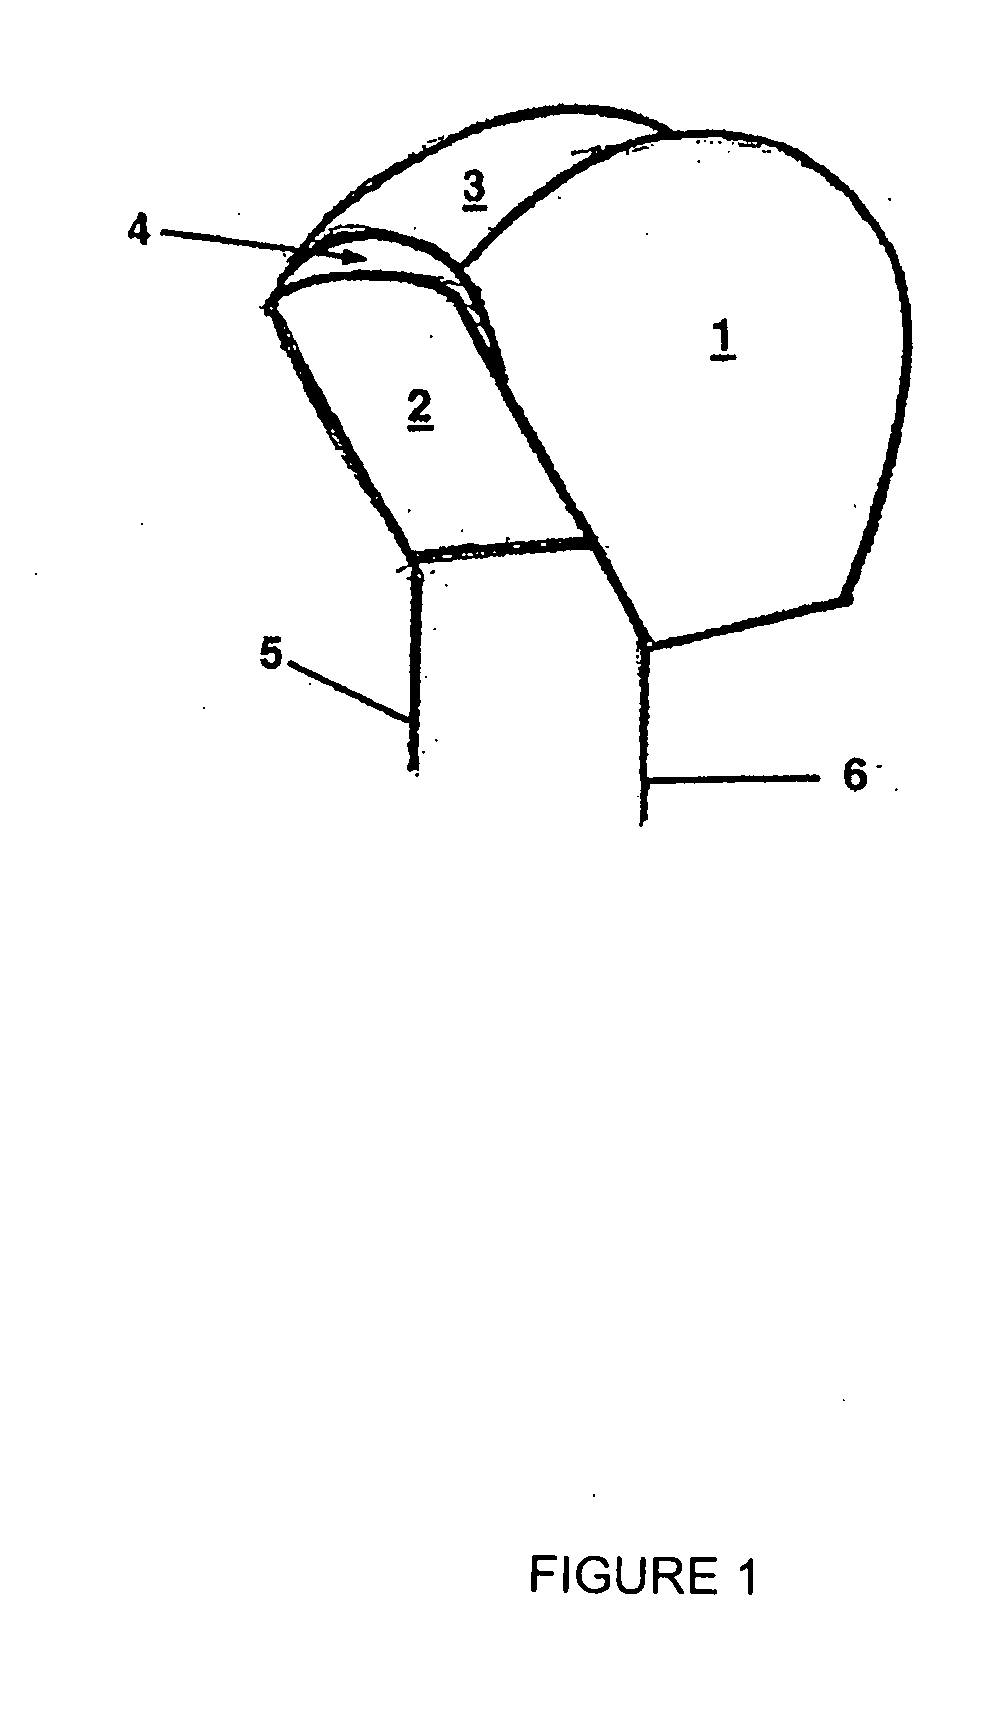 Method for dyeing fibers containing keratin